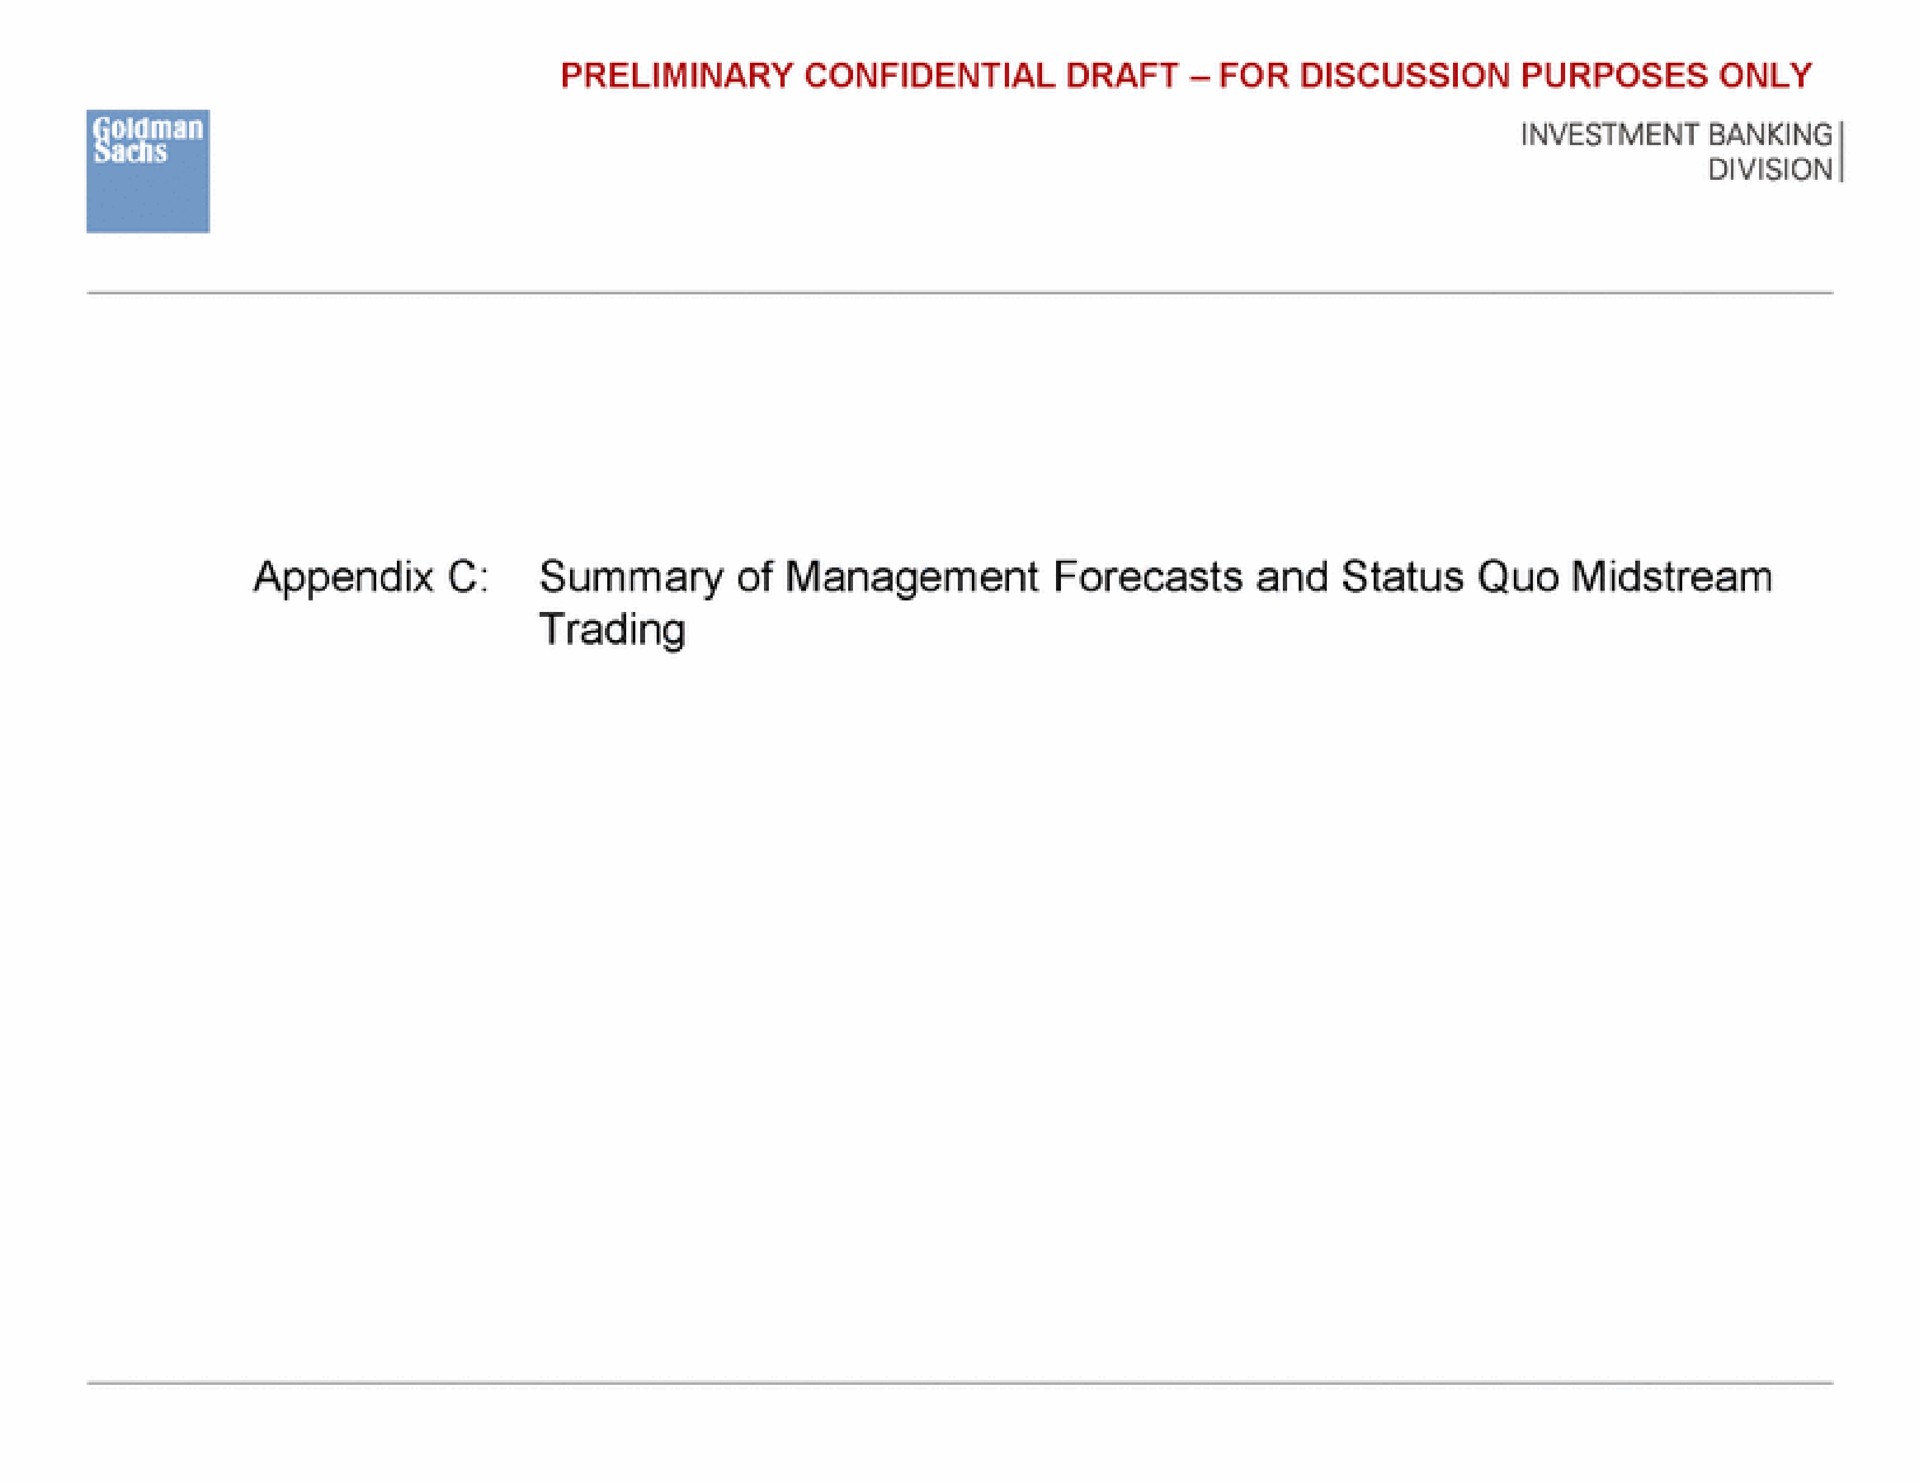 appendix summary of management forecasts and status quo midstream trading | Goldman Sachs